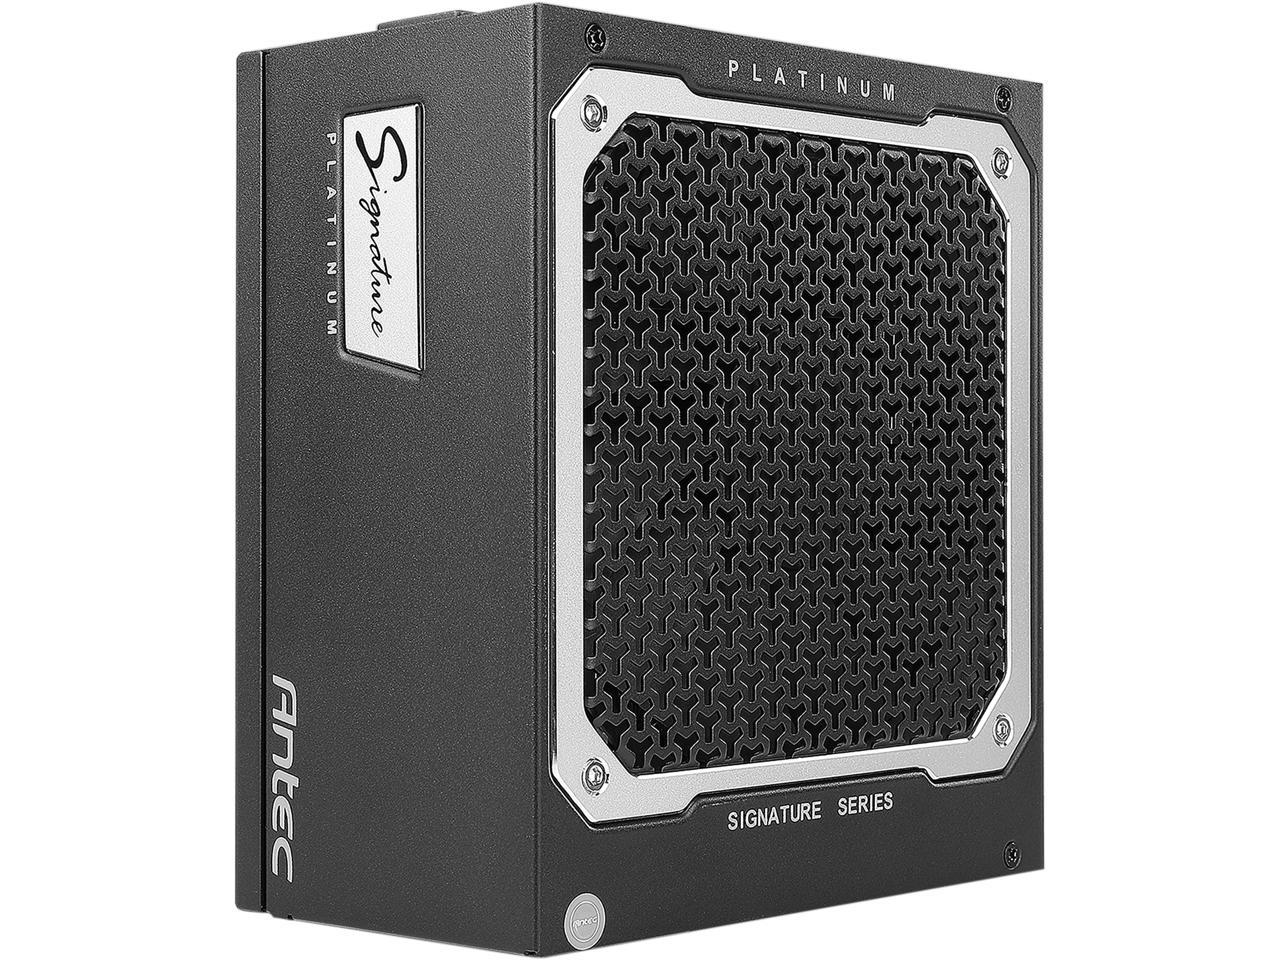 Antec Signature Series SP1300, 80 PLUS Platinum Certified, 1300W Full Modular with OC Link Feature, PhaseWave Design, Full Top-Grade Japanese Caps, Zero RPM Mode, 135 mm FDB Silence & 10-Year Warranty